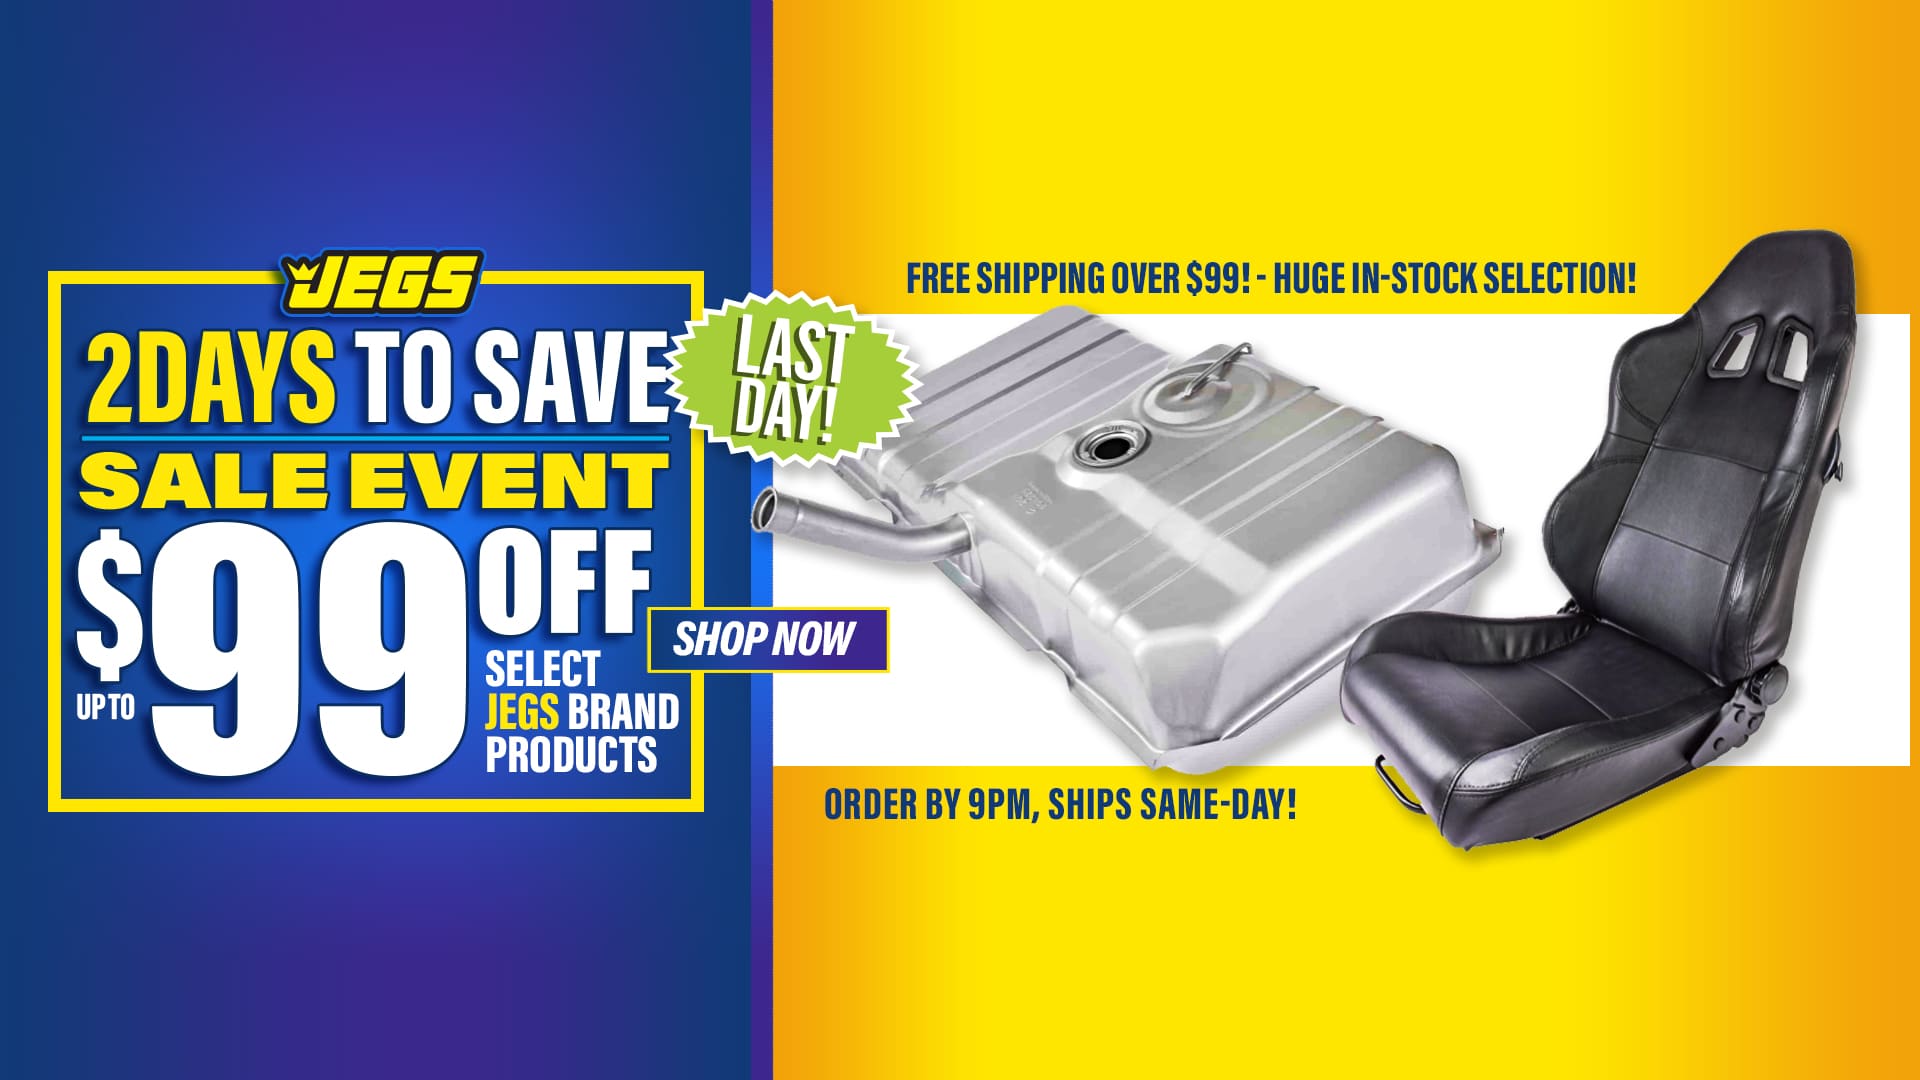 JEGS 2Day Up To $99 Off Select JEGS Brand Products Last Day